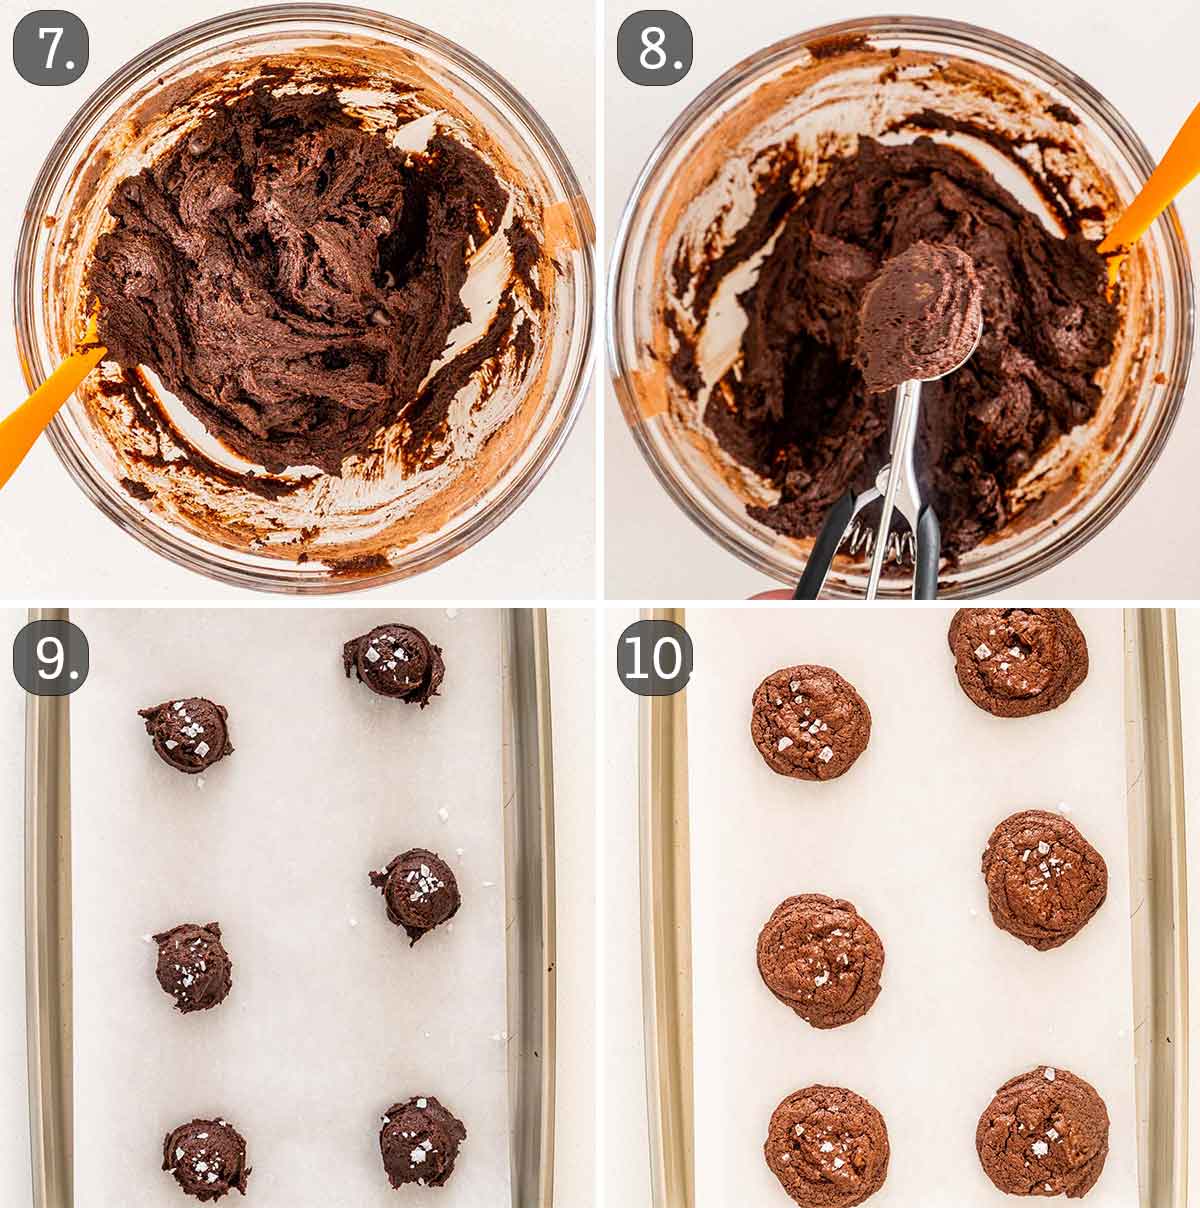 process shots showing how to finish making chocolate brownie cookies.